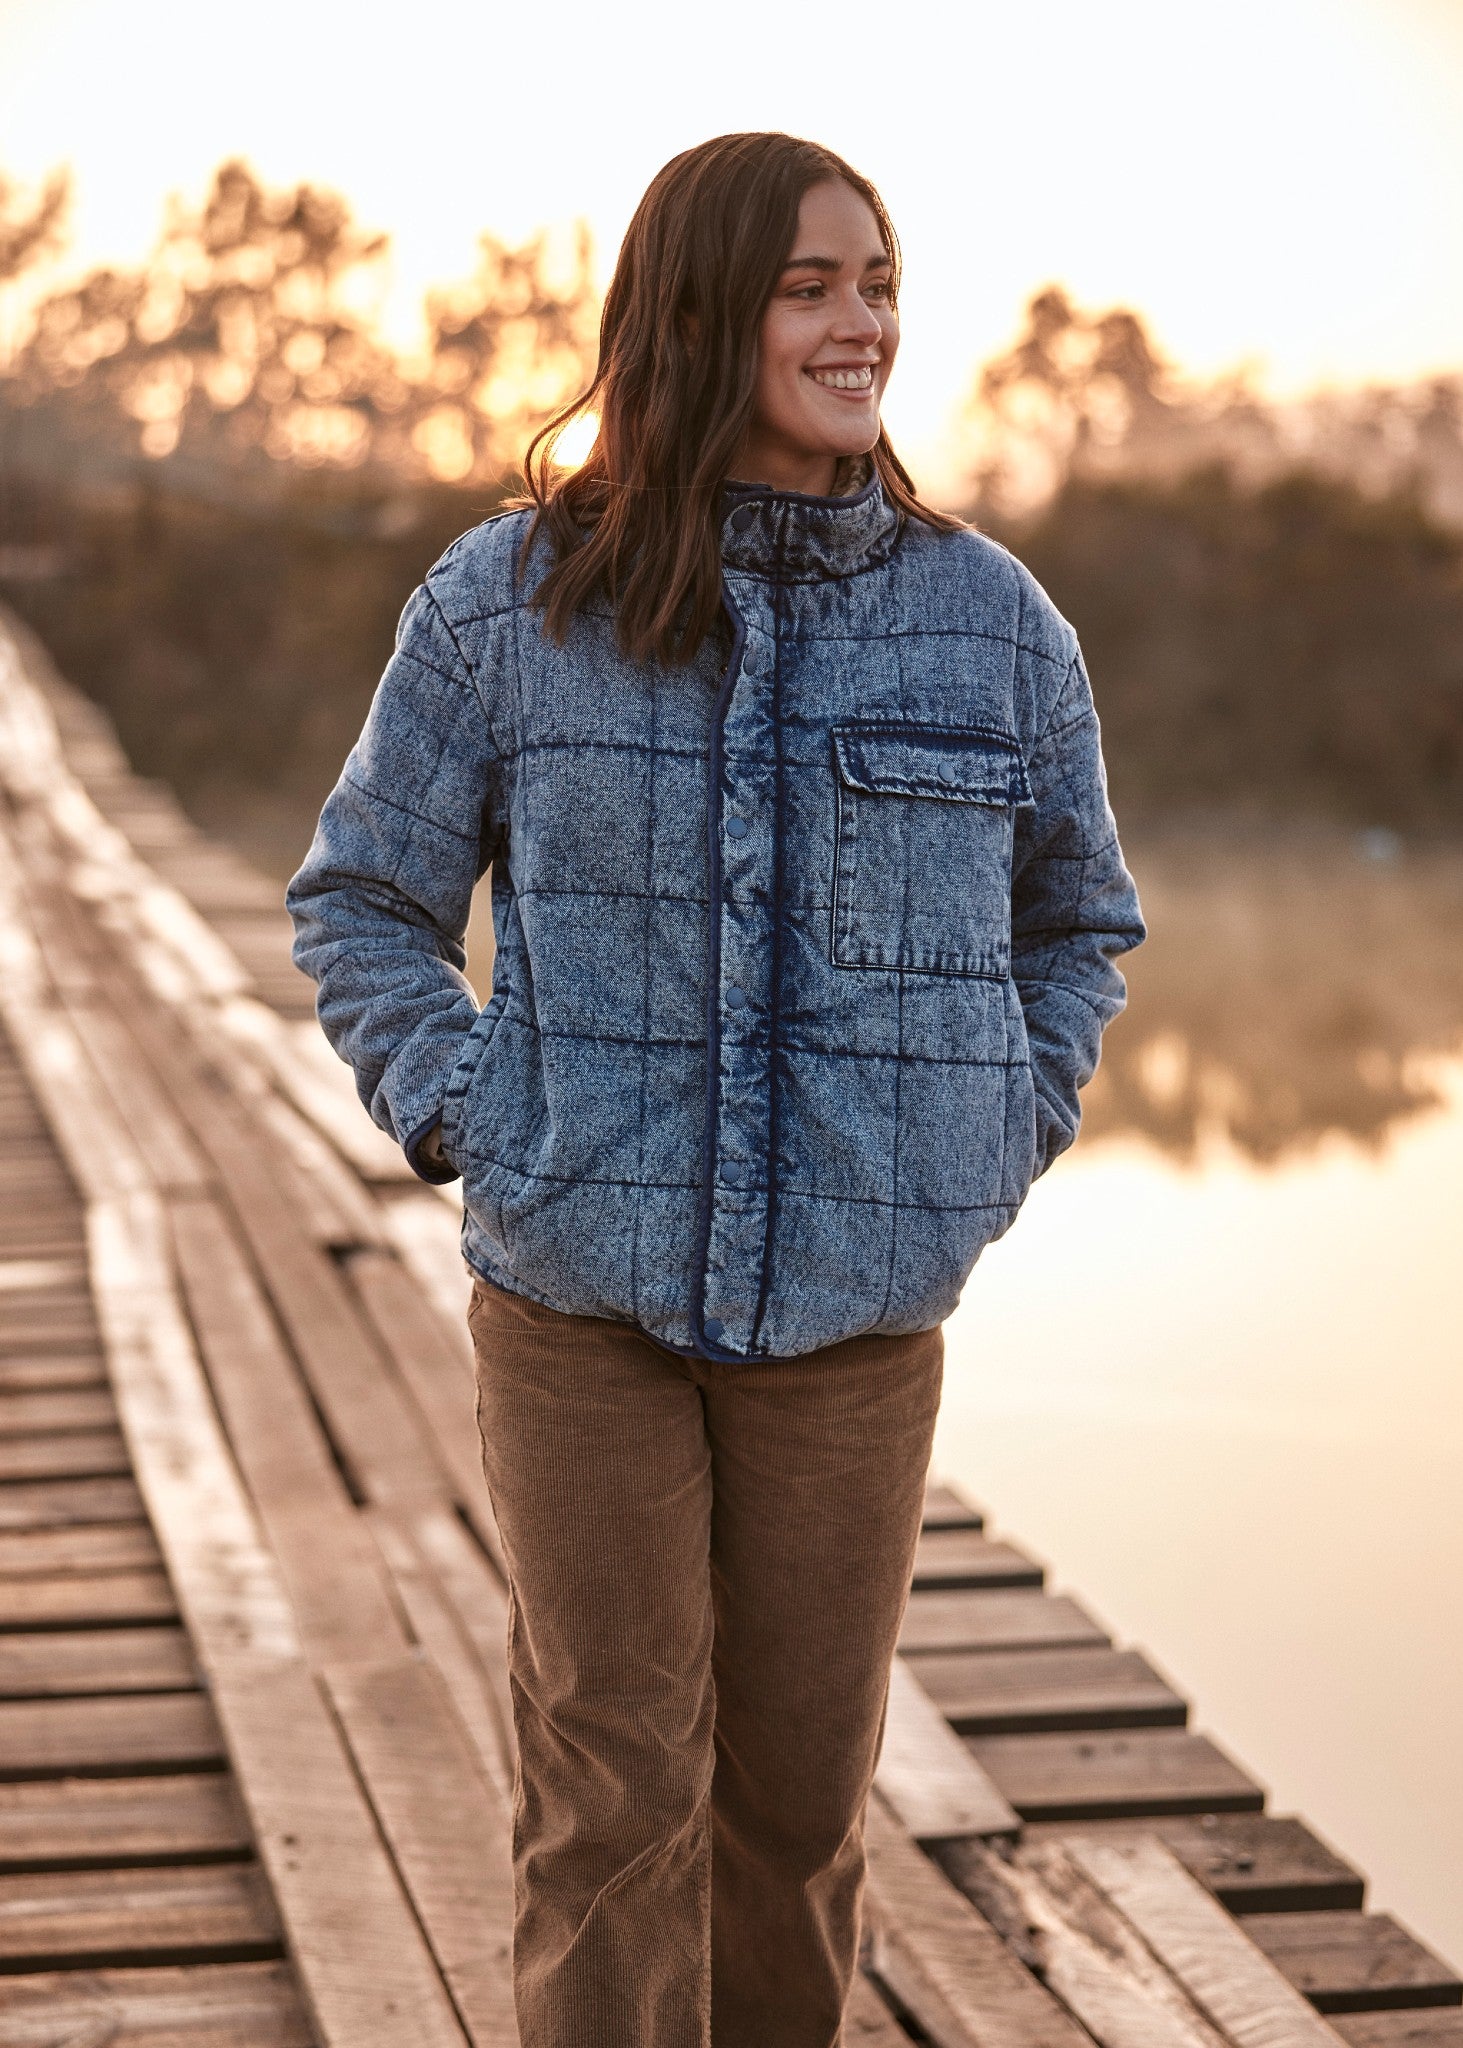 Chaqueta mujer Bomber Quilted azul